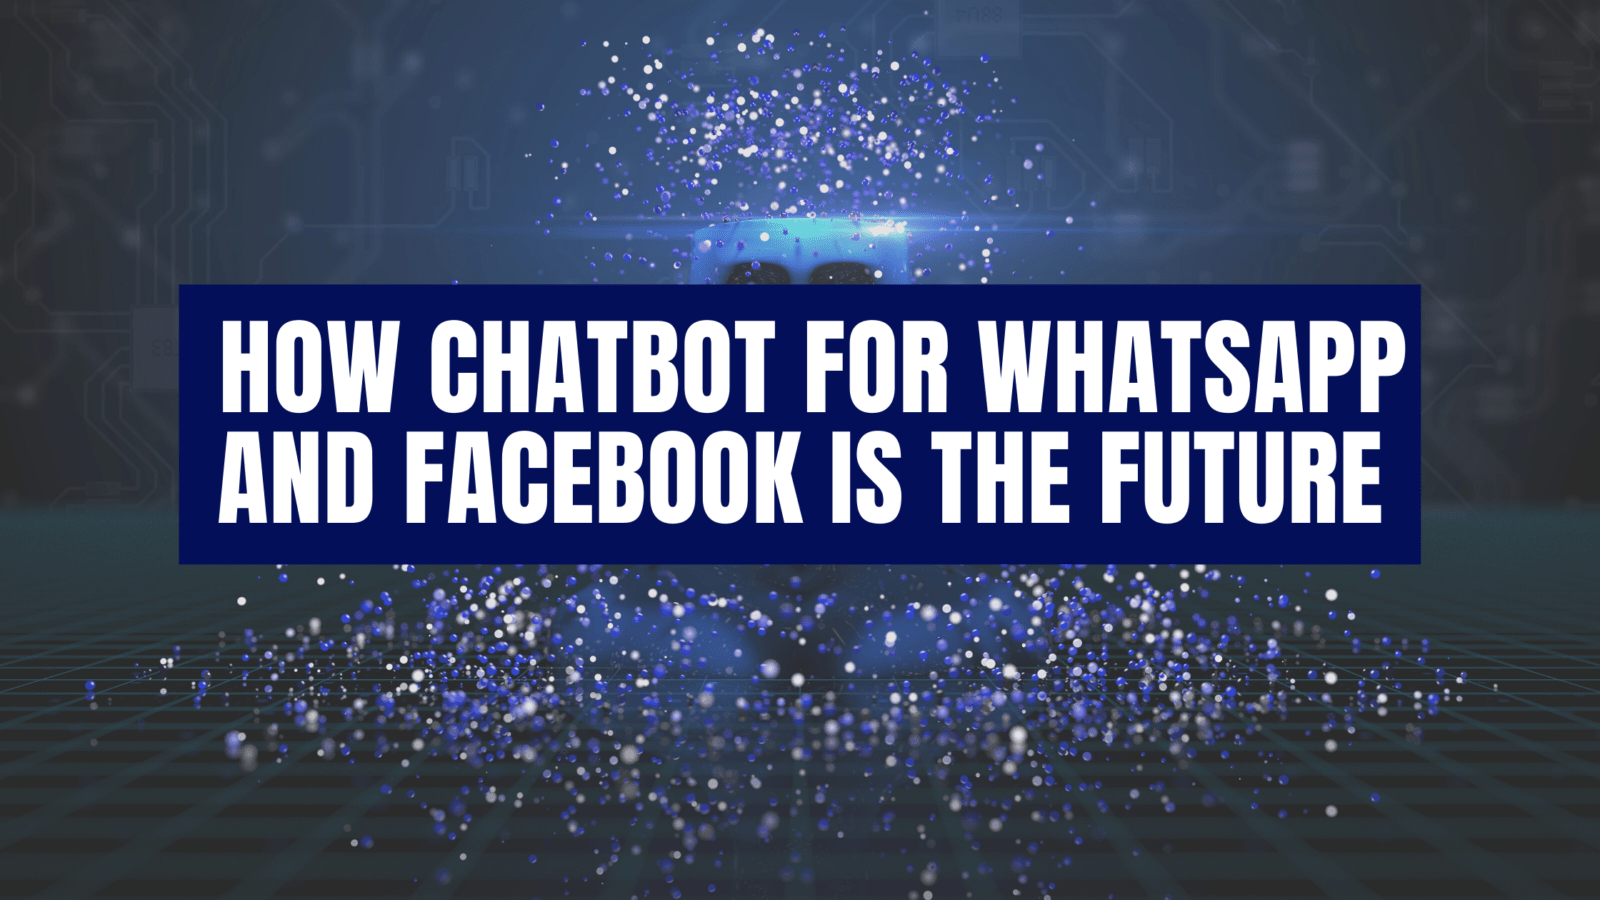 Chatbots: How chatbot for whatsapp and facebook is the future